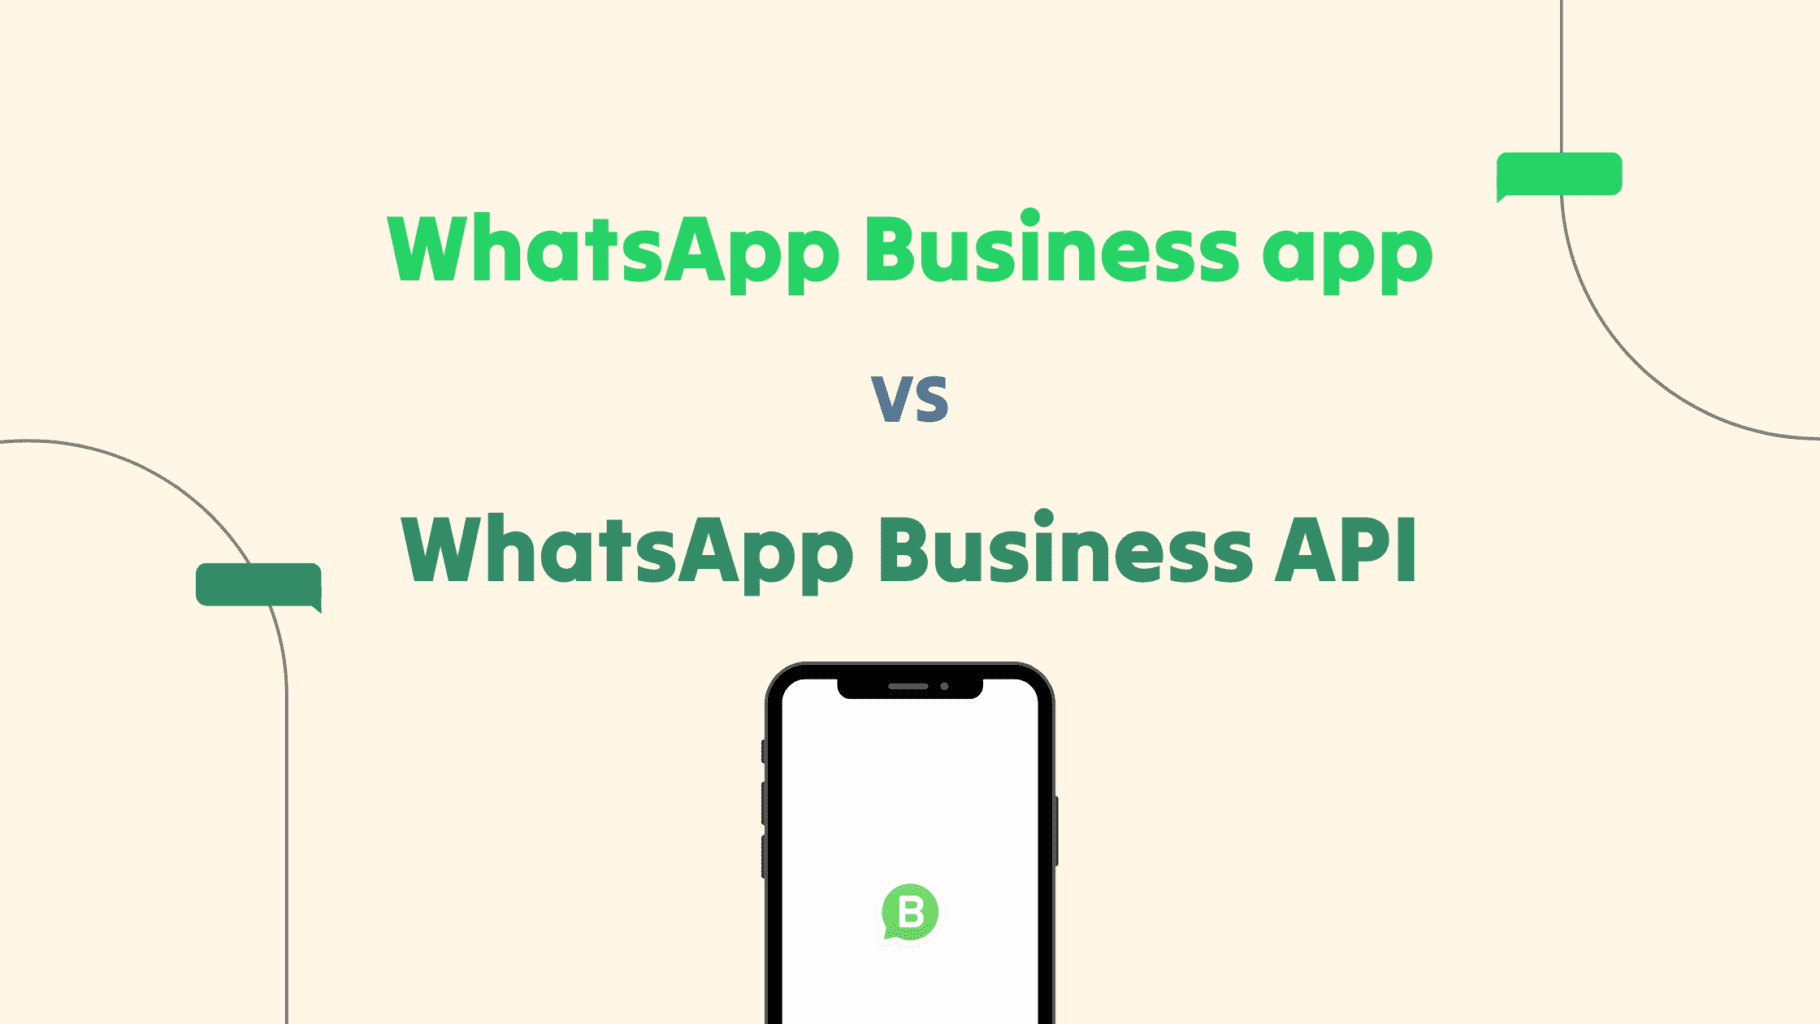 What’s the difference between WhatsApp Business & WhatsApp Business API?